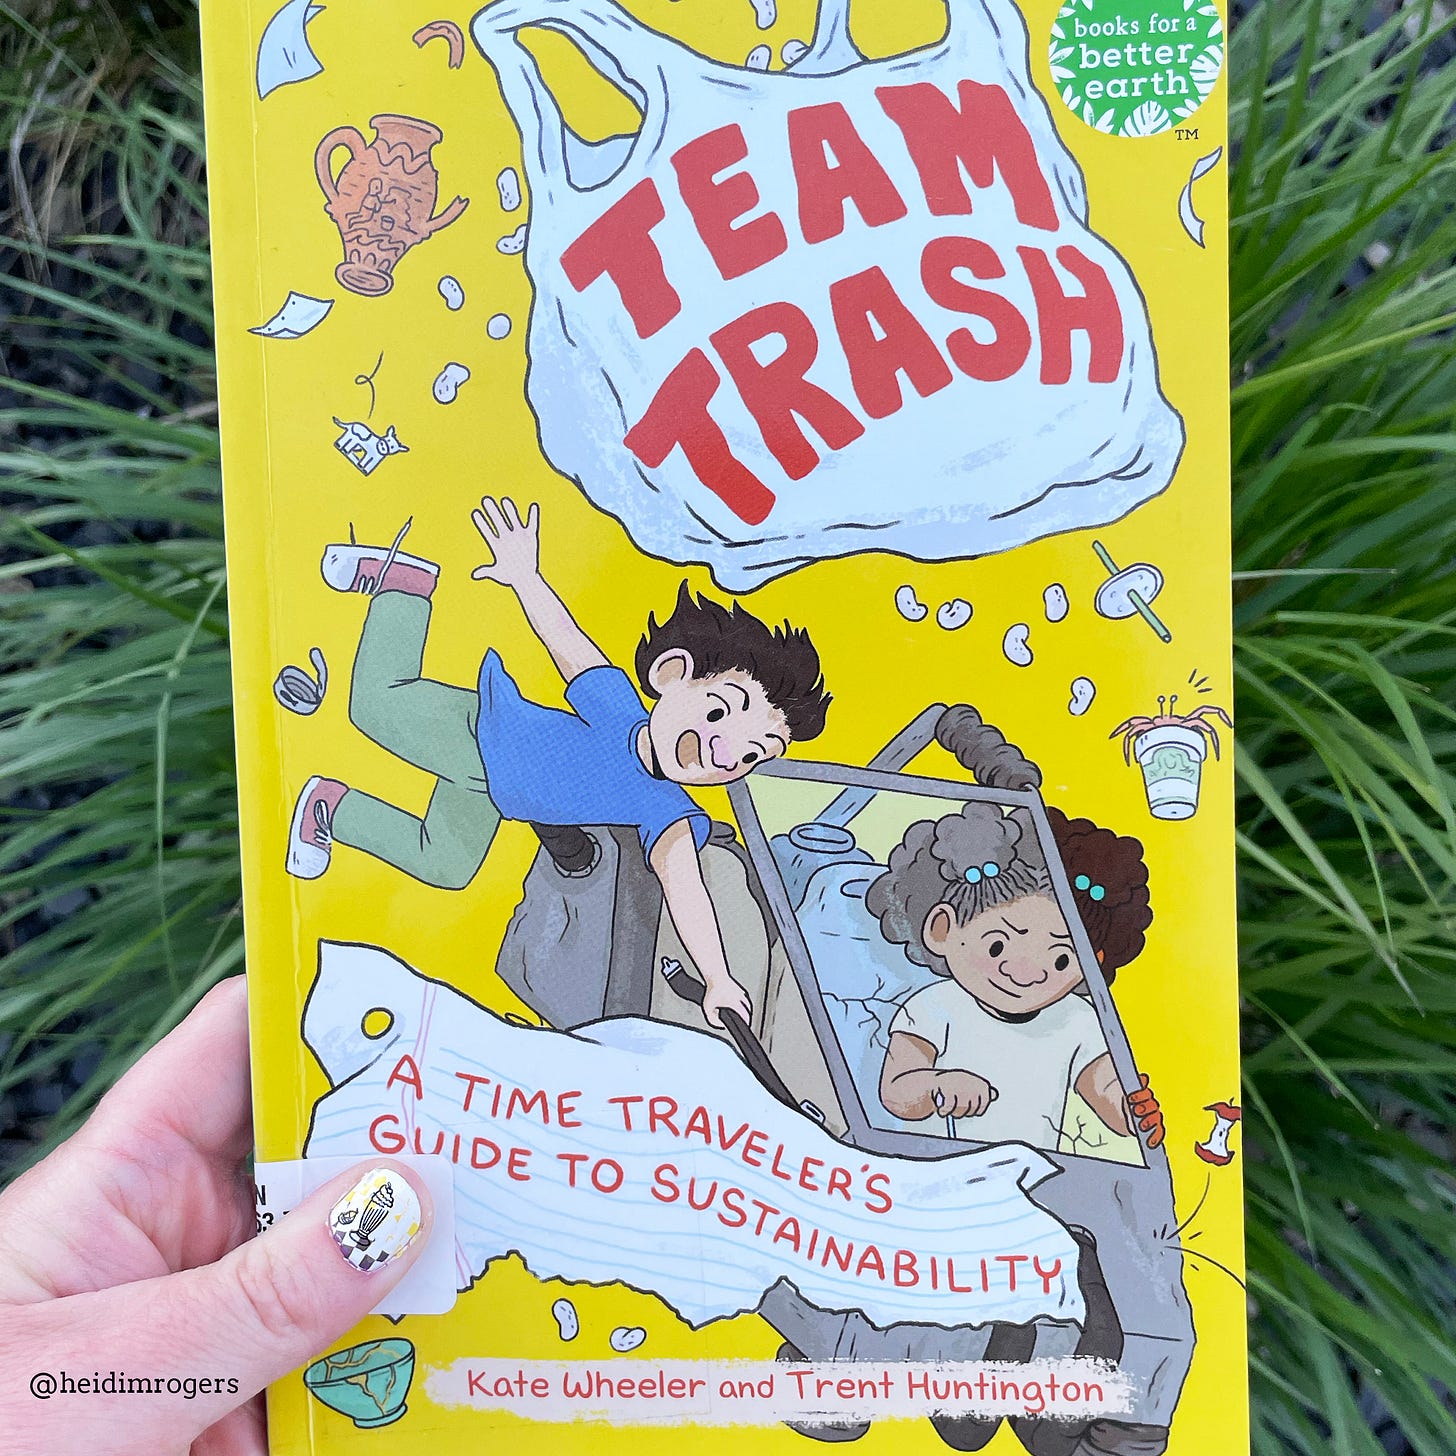 White woman's hand holding the young graphic novel, Team Trash, over long grass.